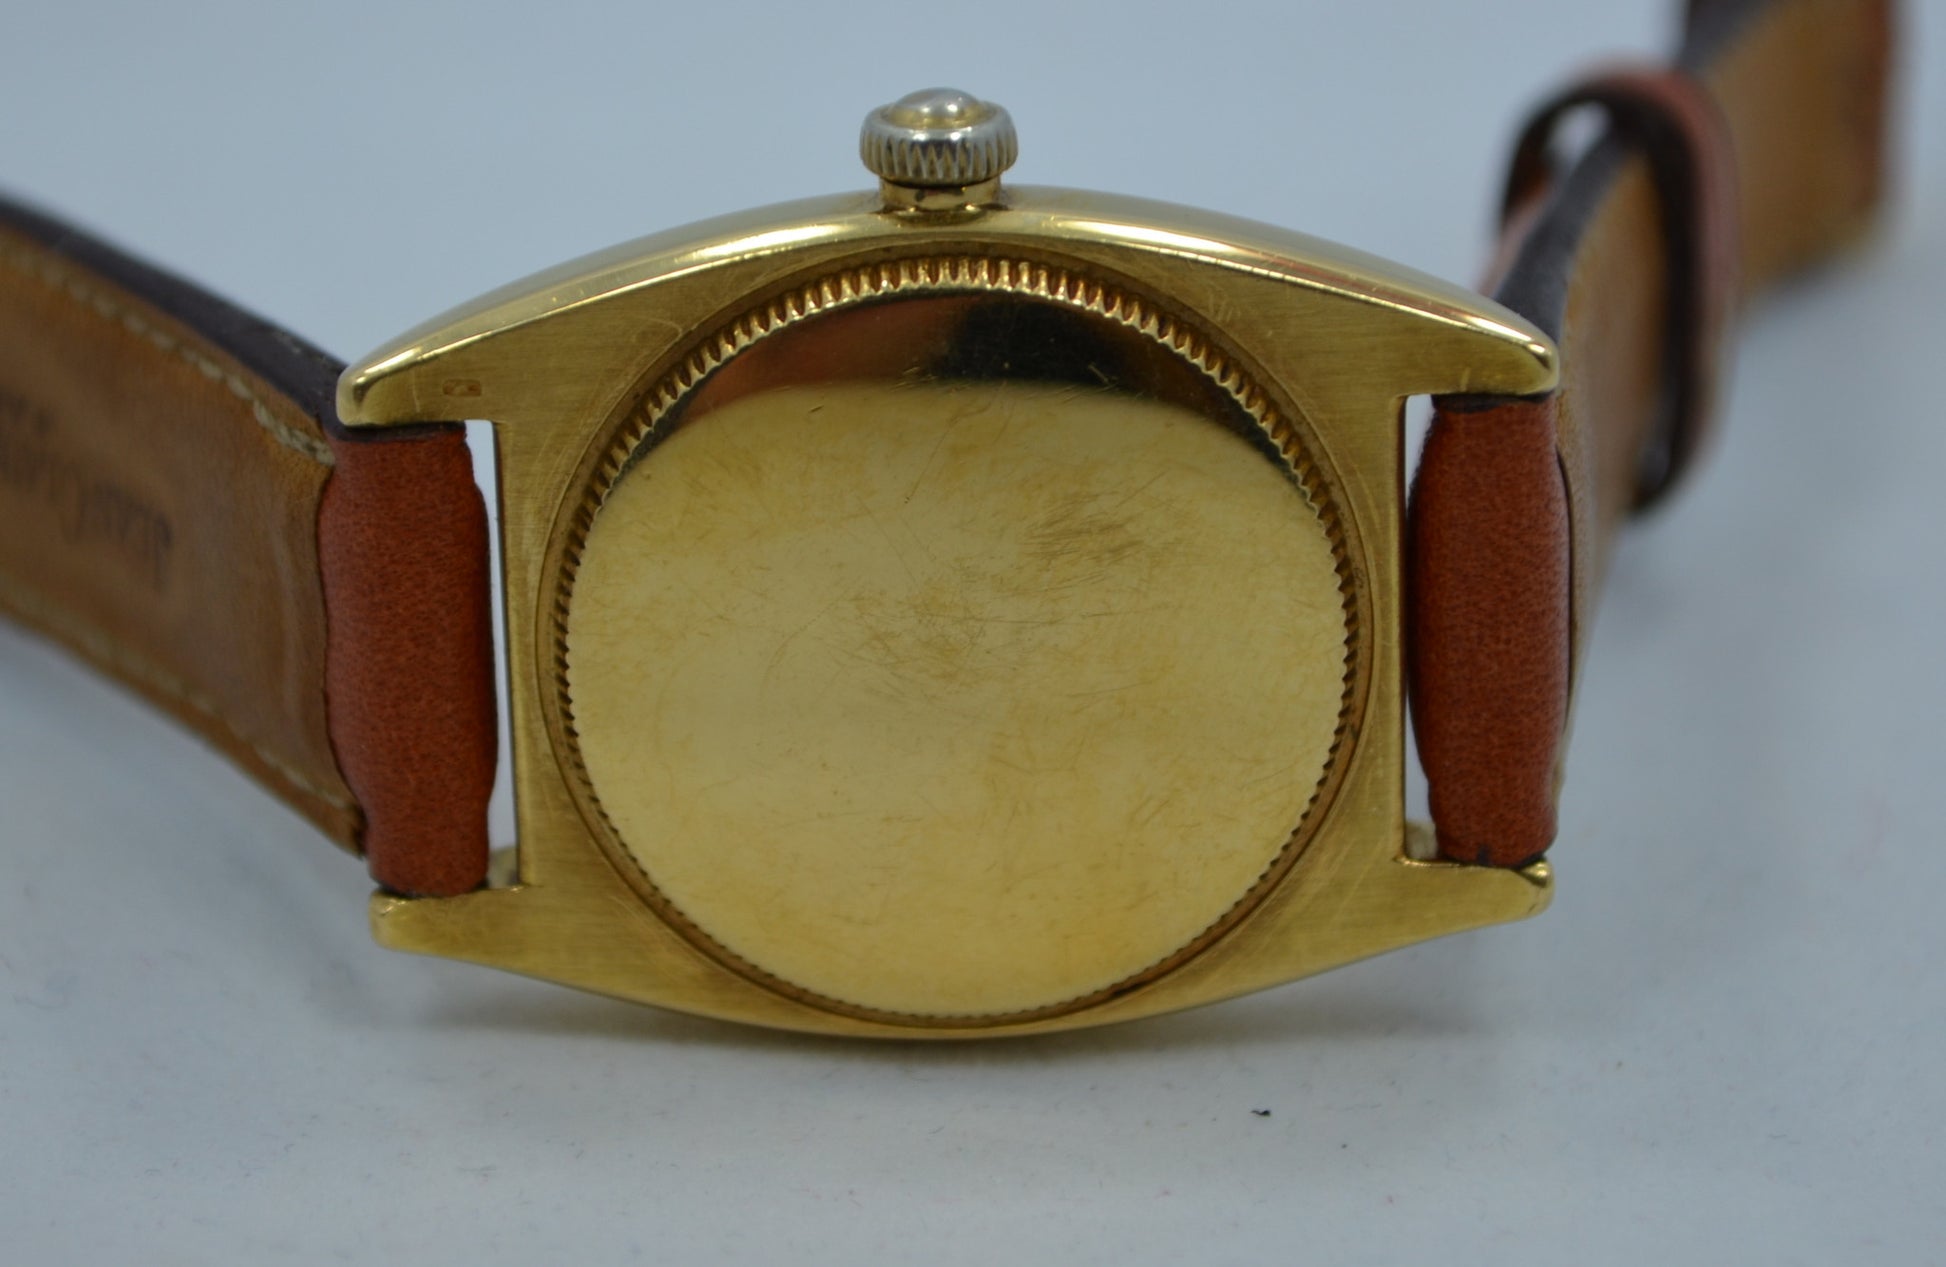 Vintage Rolex 3359 Viceroy 18K Yellow Gold 1934 Wristwatch - Hashtag Watch Company